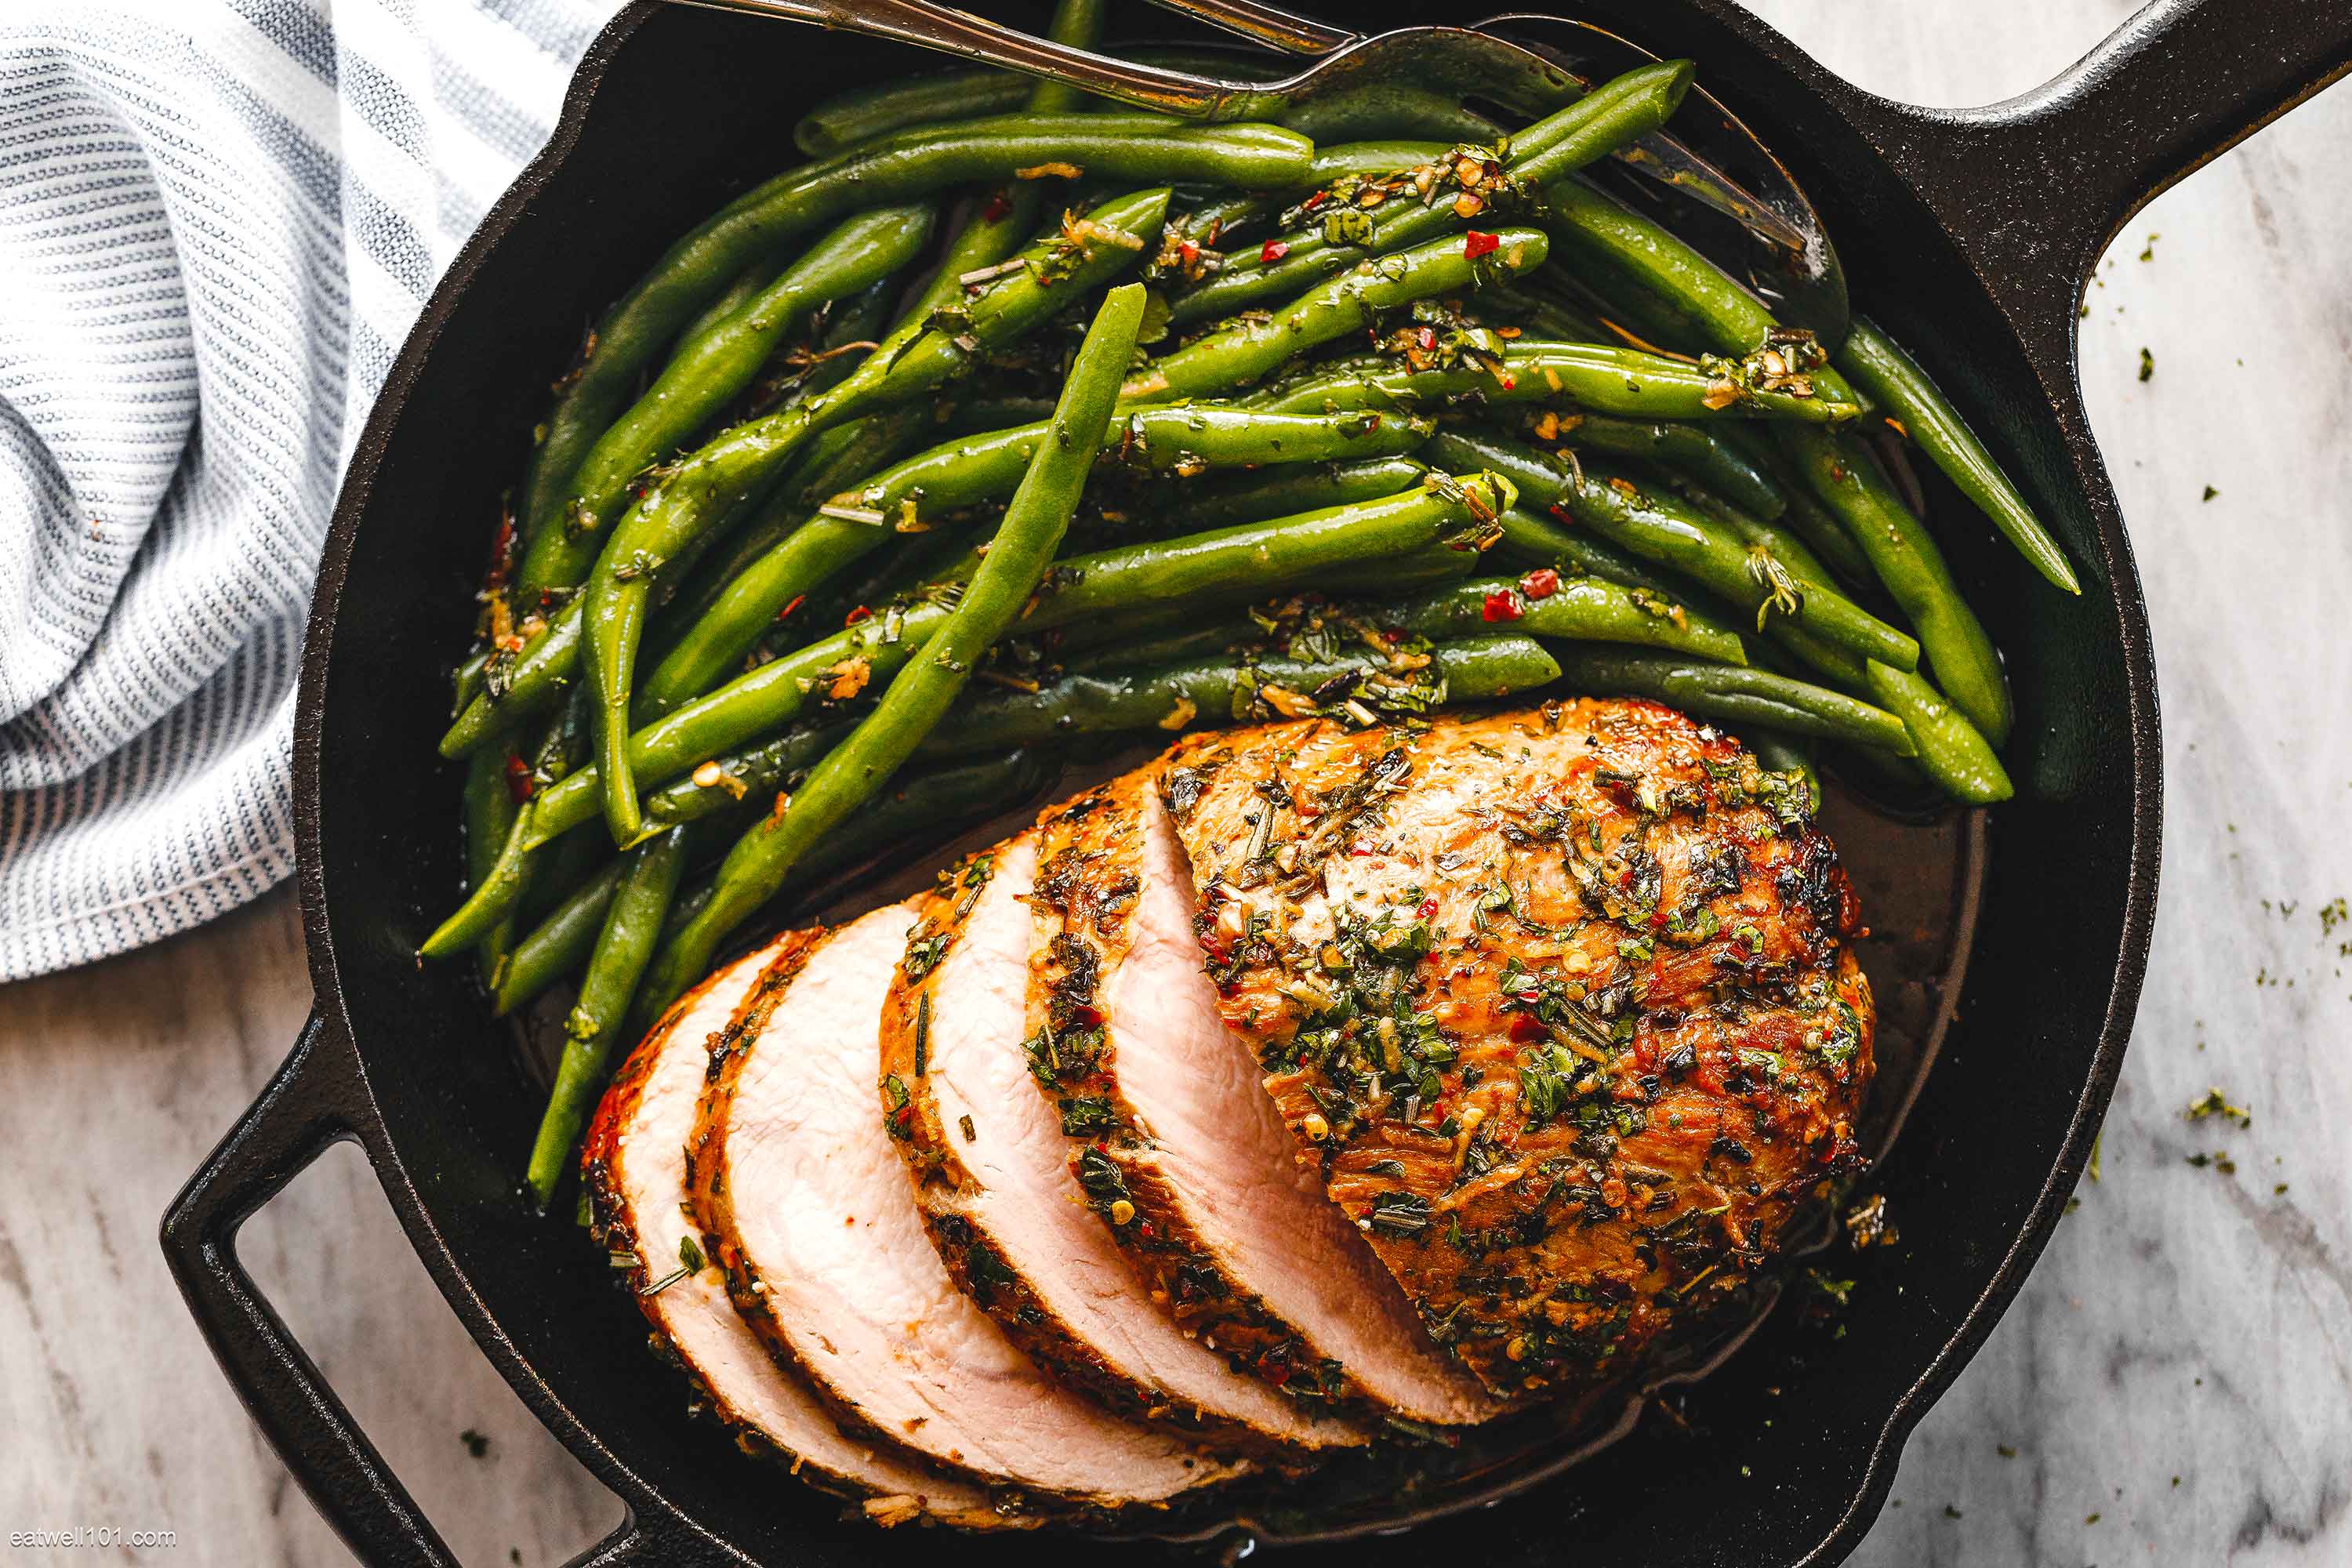 Roasted Pork Loin With Green Beans Recipe Roasted Pork Loin Recipe Eatwell101,Bbq Chicken Sides